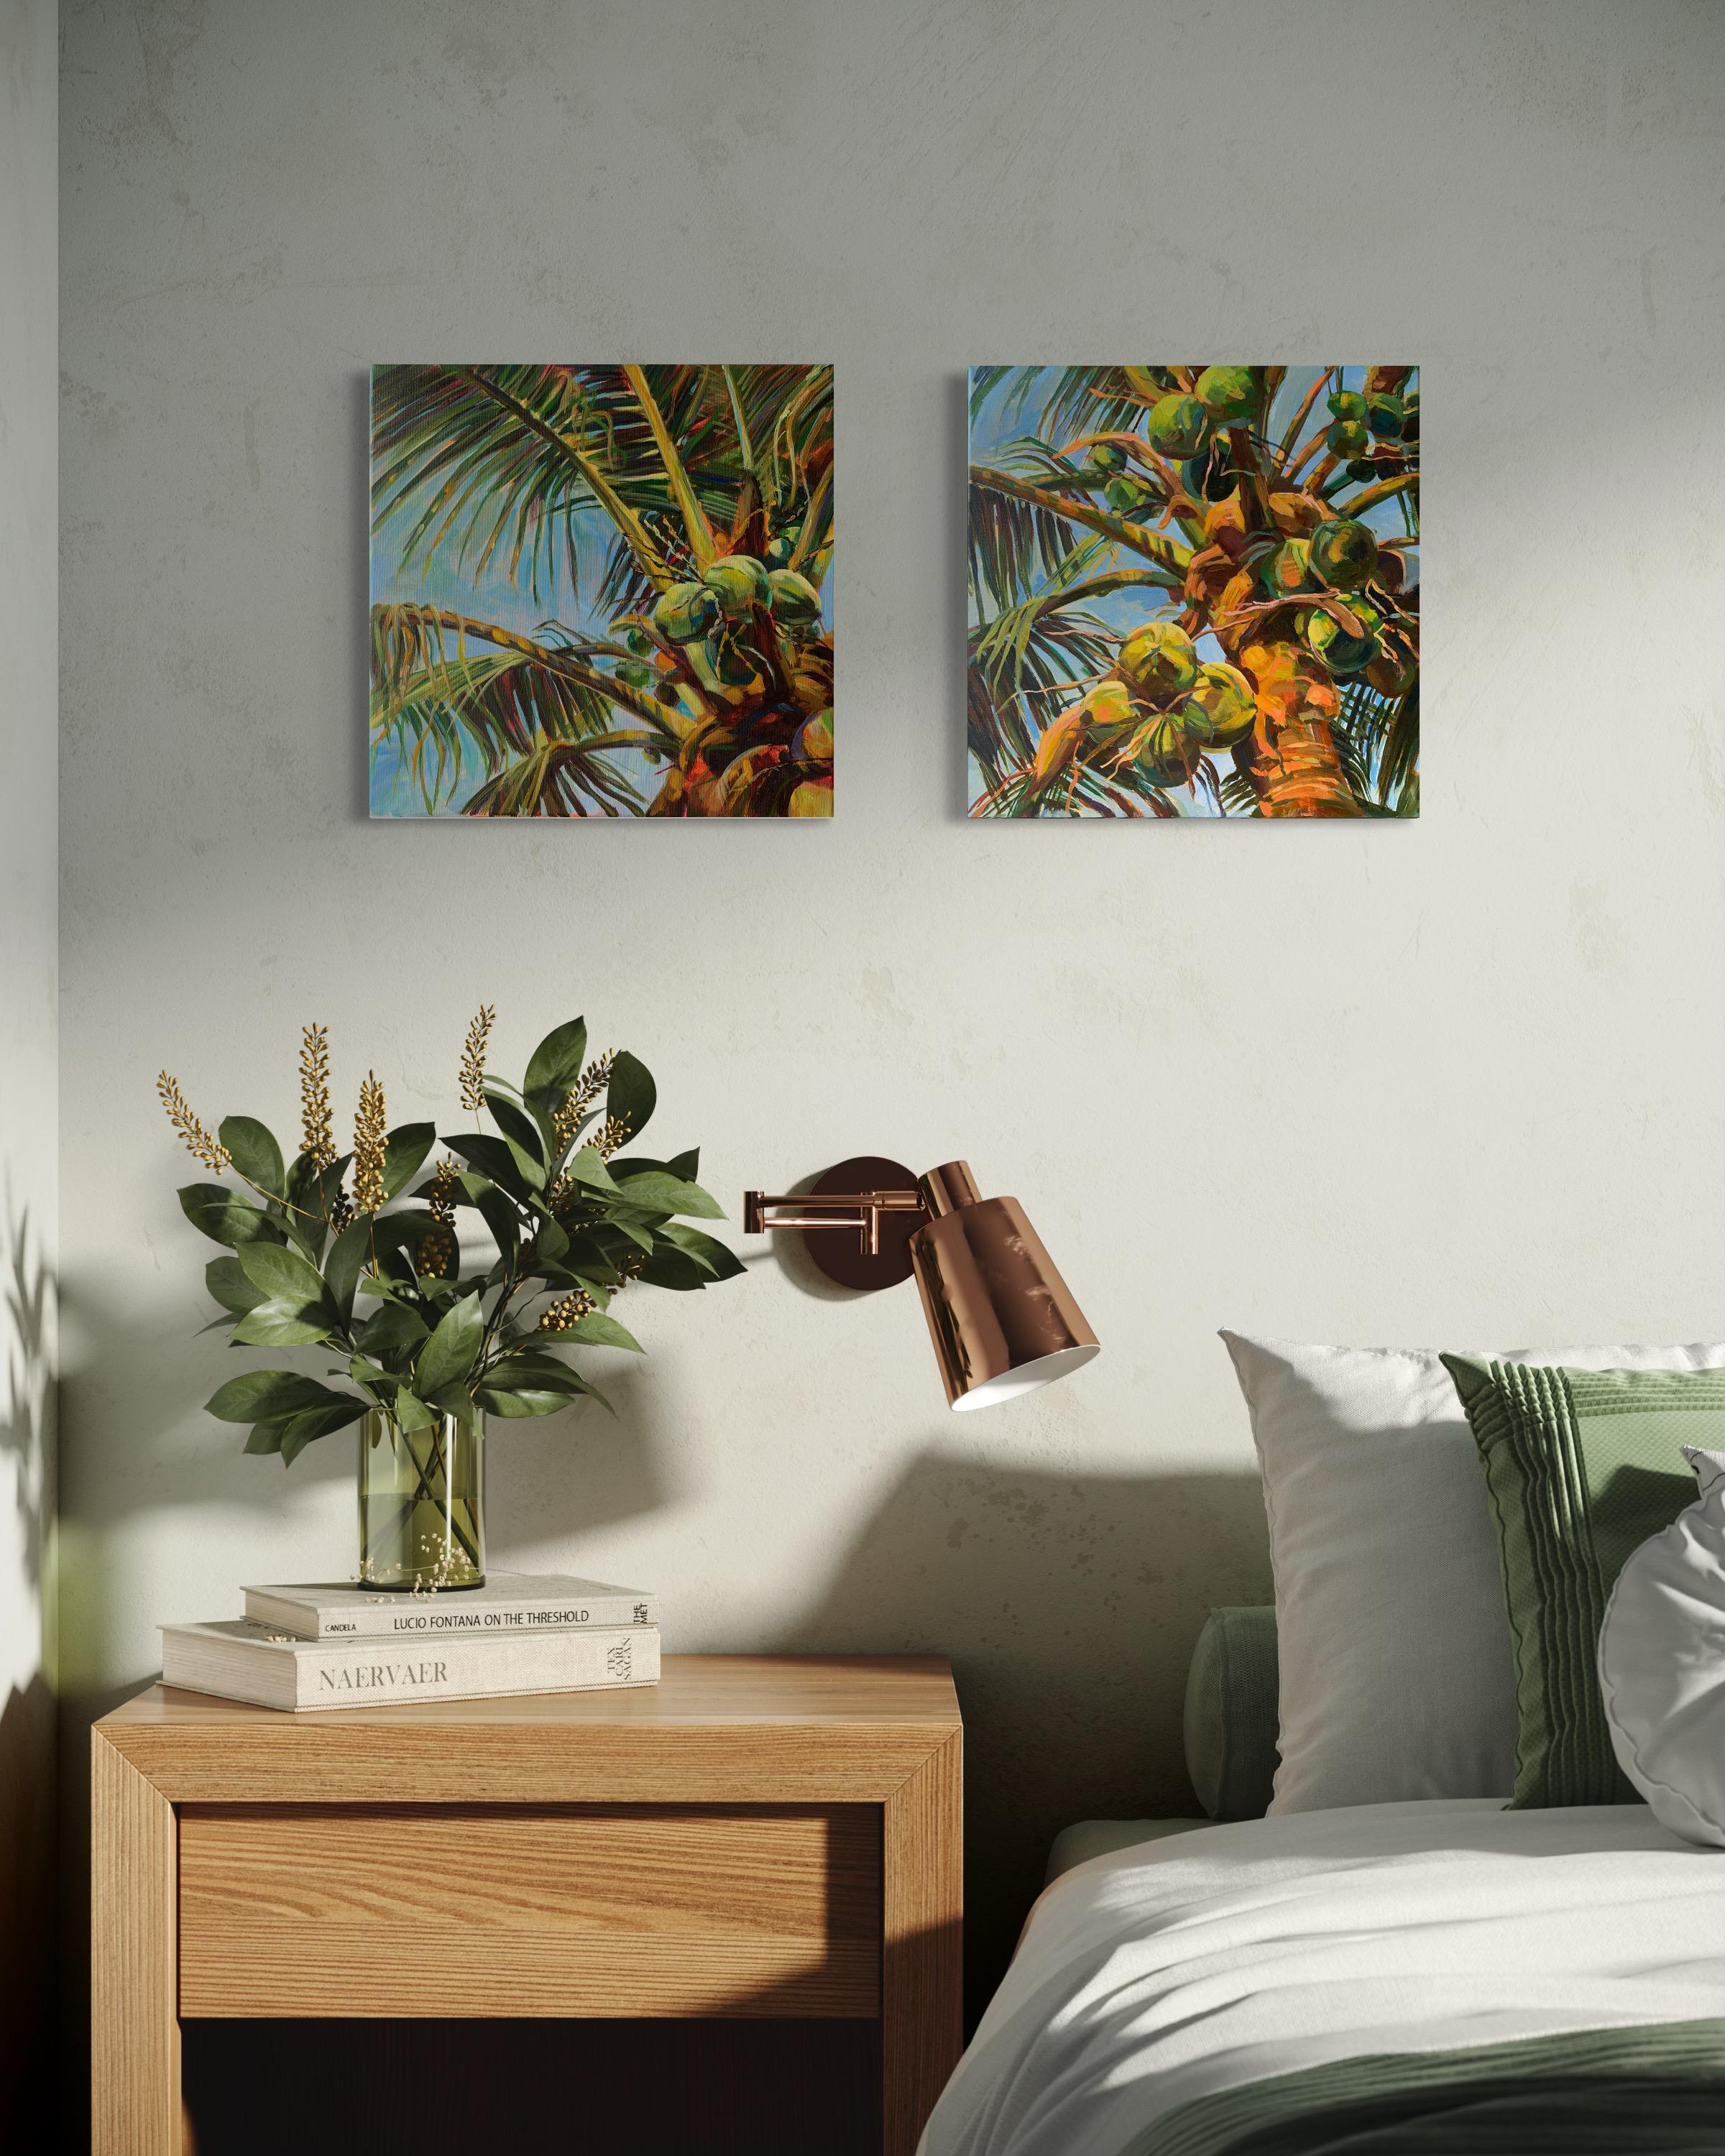 Original oil paintings  with positive mood. This  collection  was inspired by nature of tropical garden in sunny days.  Bright illumination from the sun on a coconut tree, palm trees evoke memories of a vacation in the tropics. Every plant is